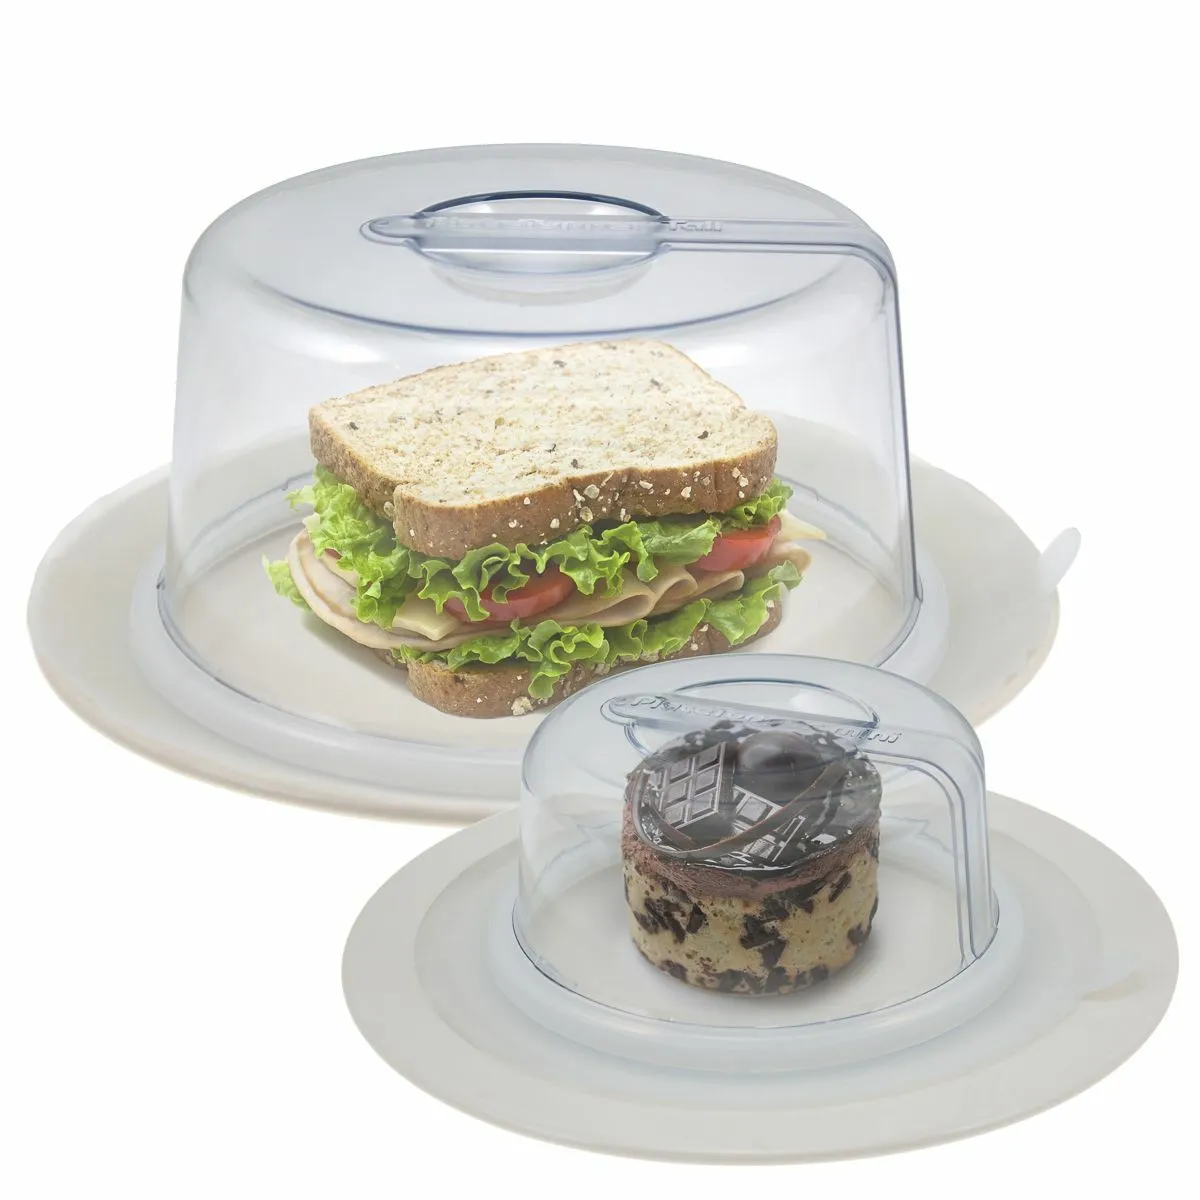 2 PlateTopper (Mini & Tall) Universal Leftover Lid Microwave Cover Airtight